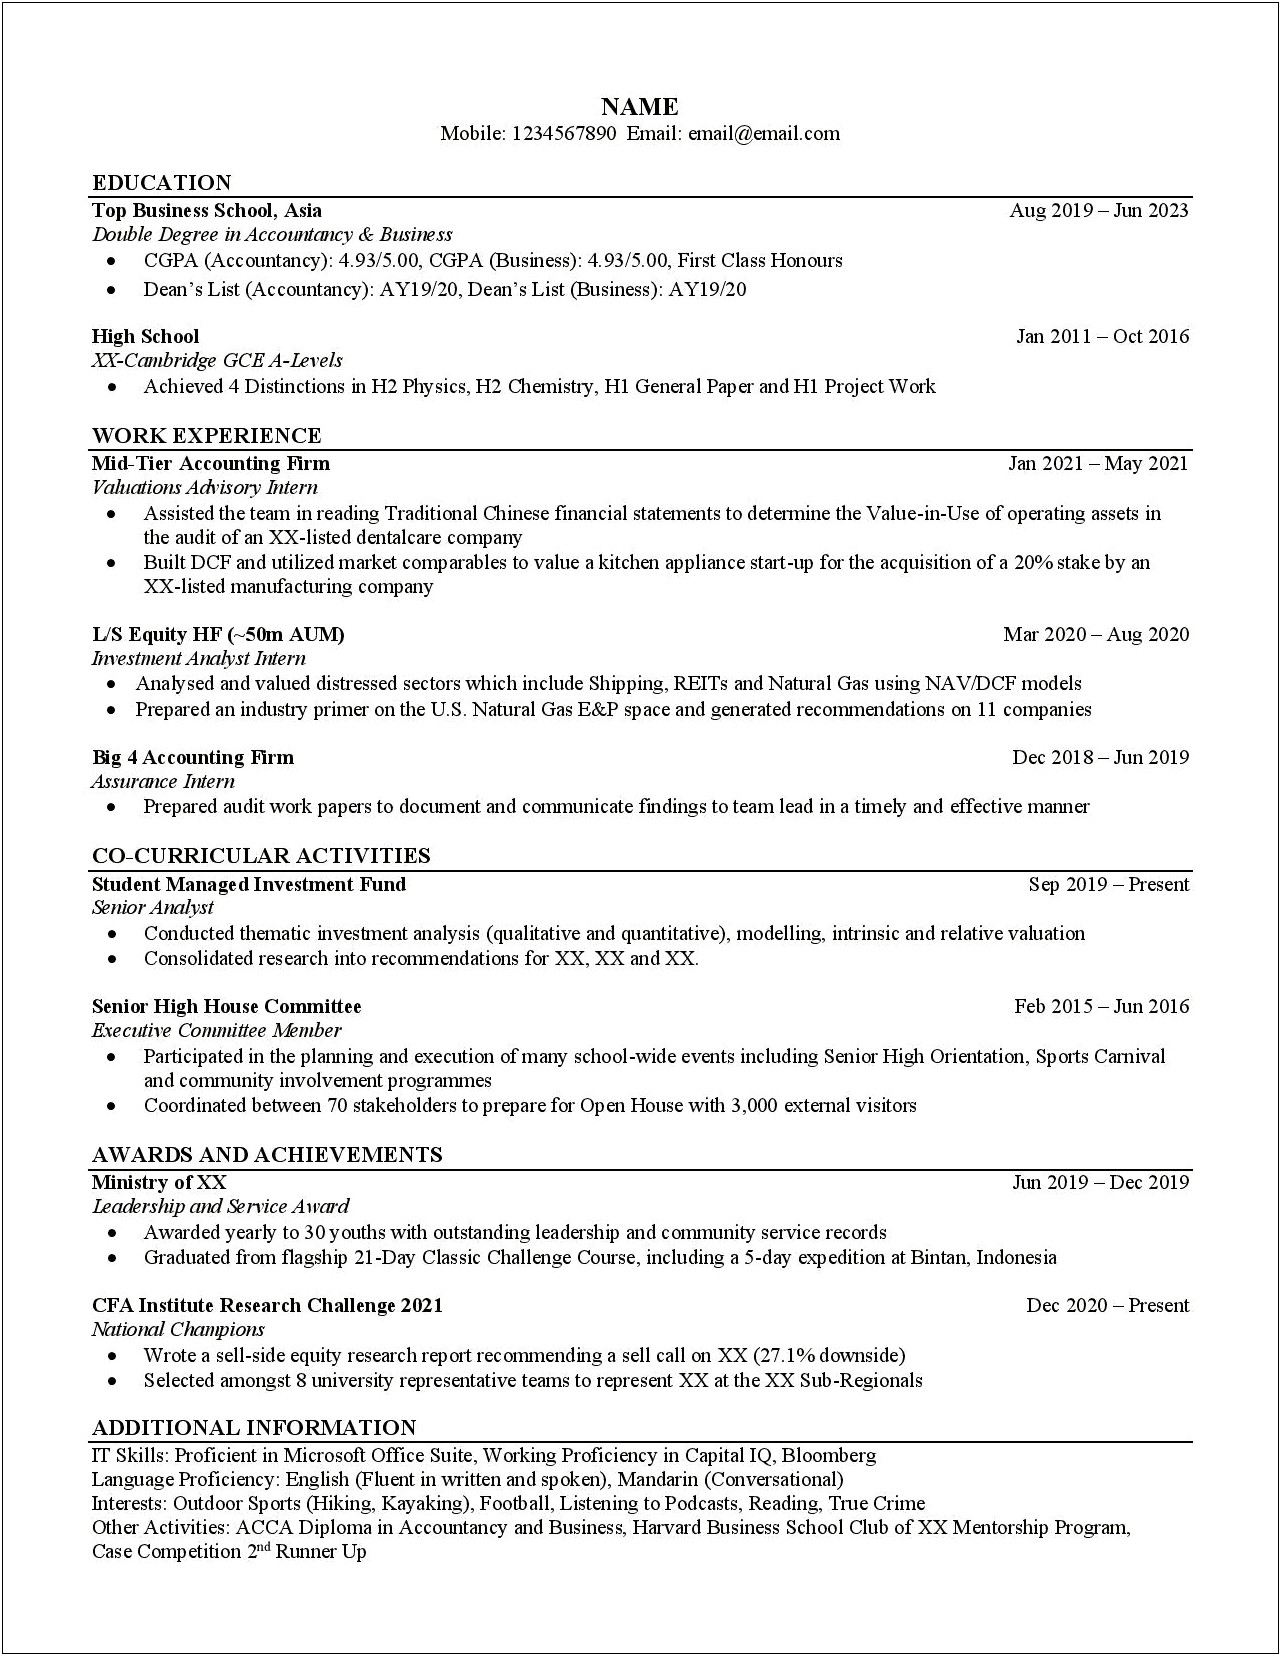 Student Managed Investment Fund Resume